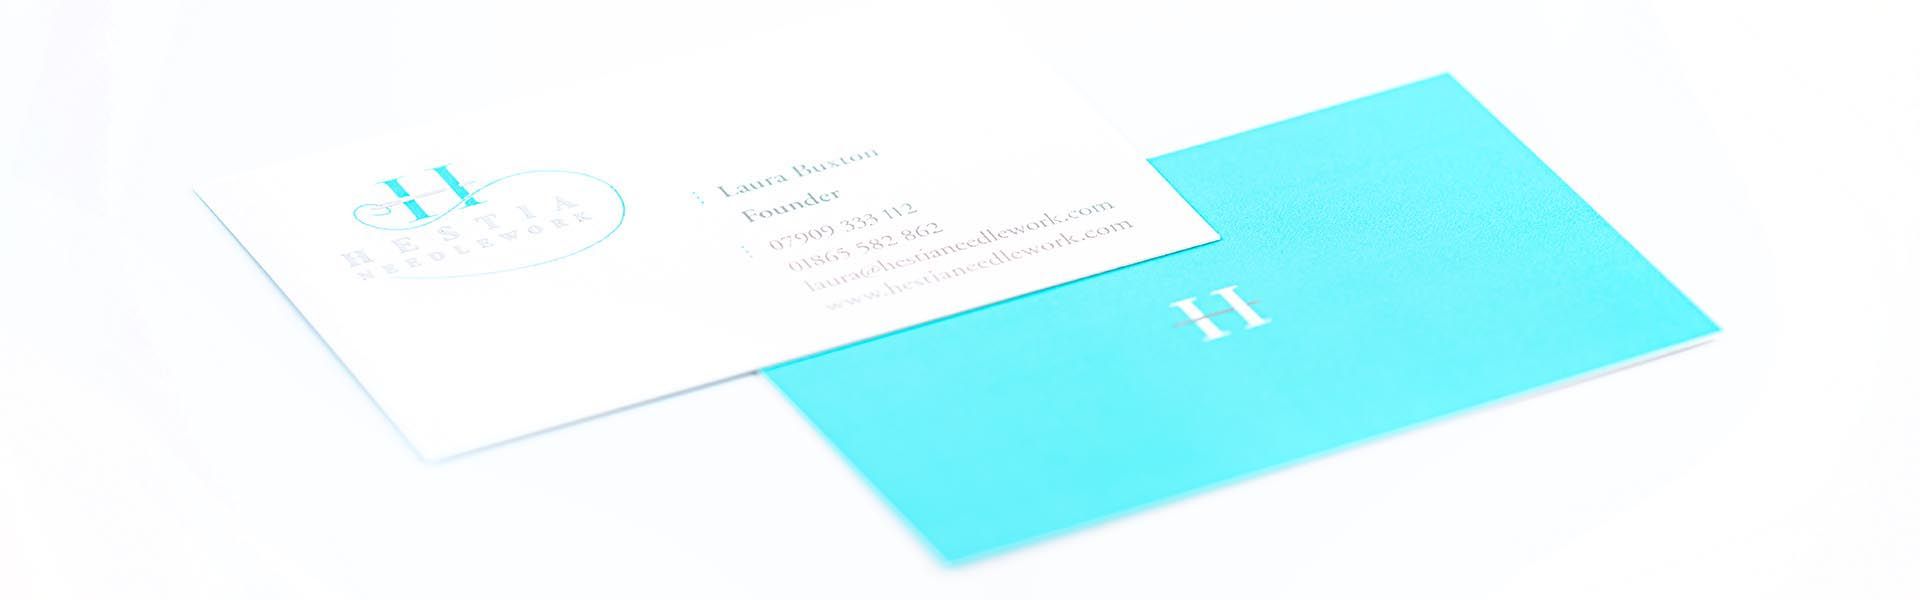 a blue and white business card for hestia needlework